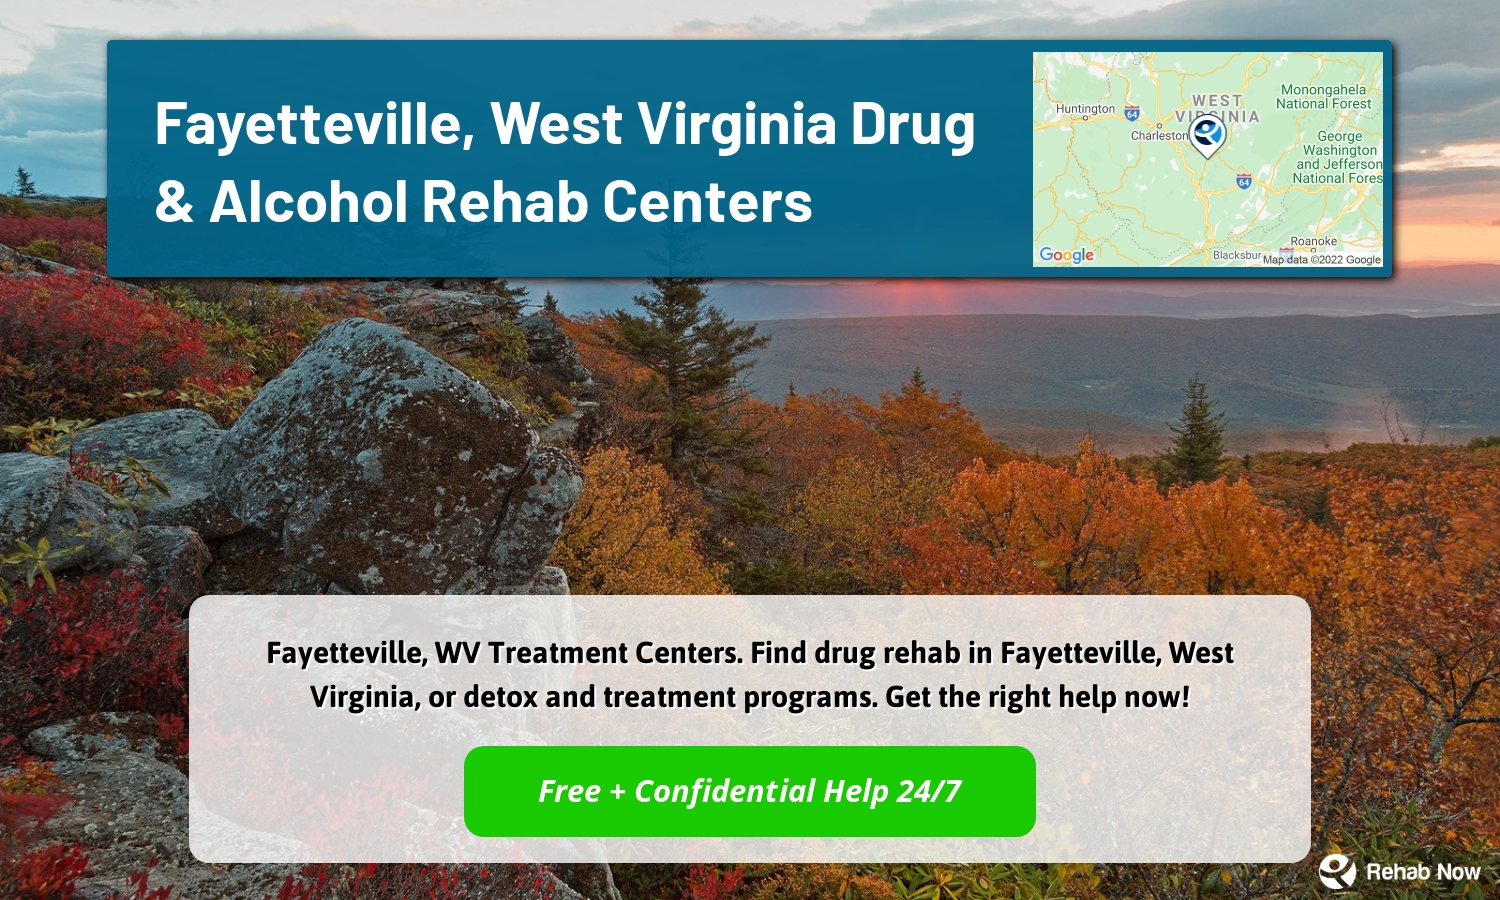 Fayetteville, WV Treatment Centers. Find drug rehab in Fayetteville, West Virginia, or detox and treatment programs. Get the right help now!